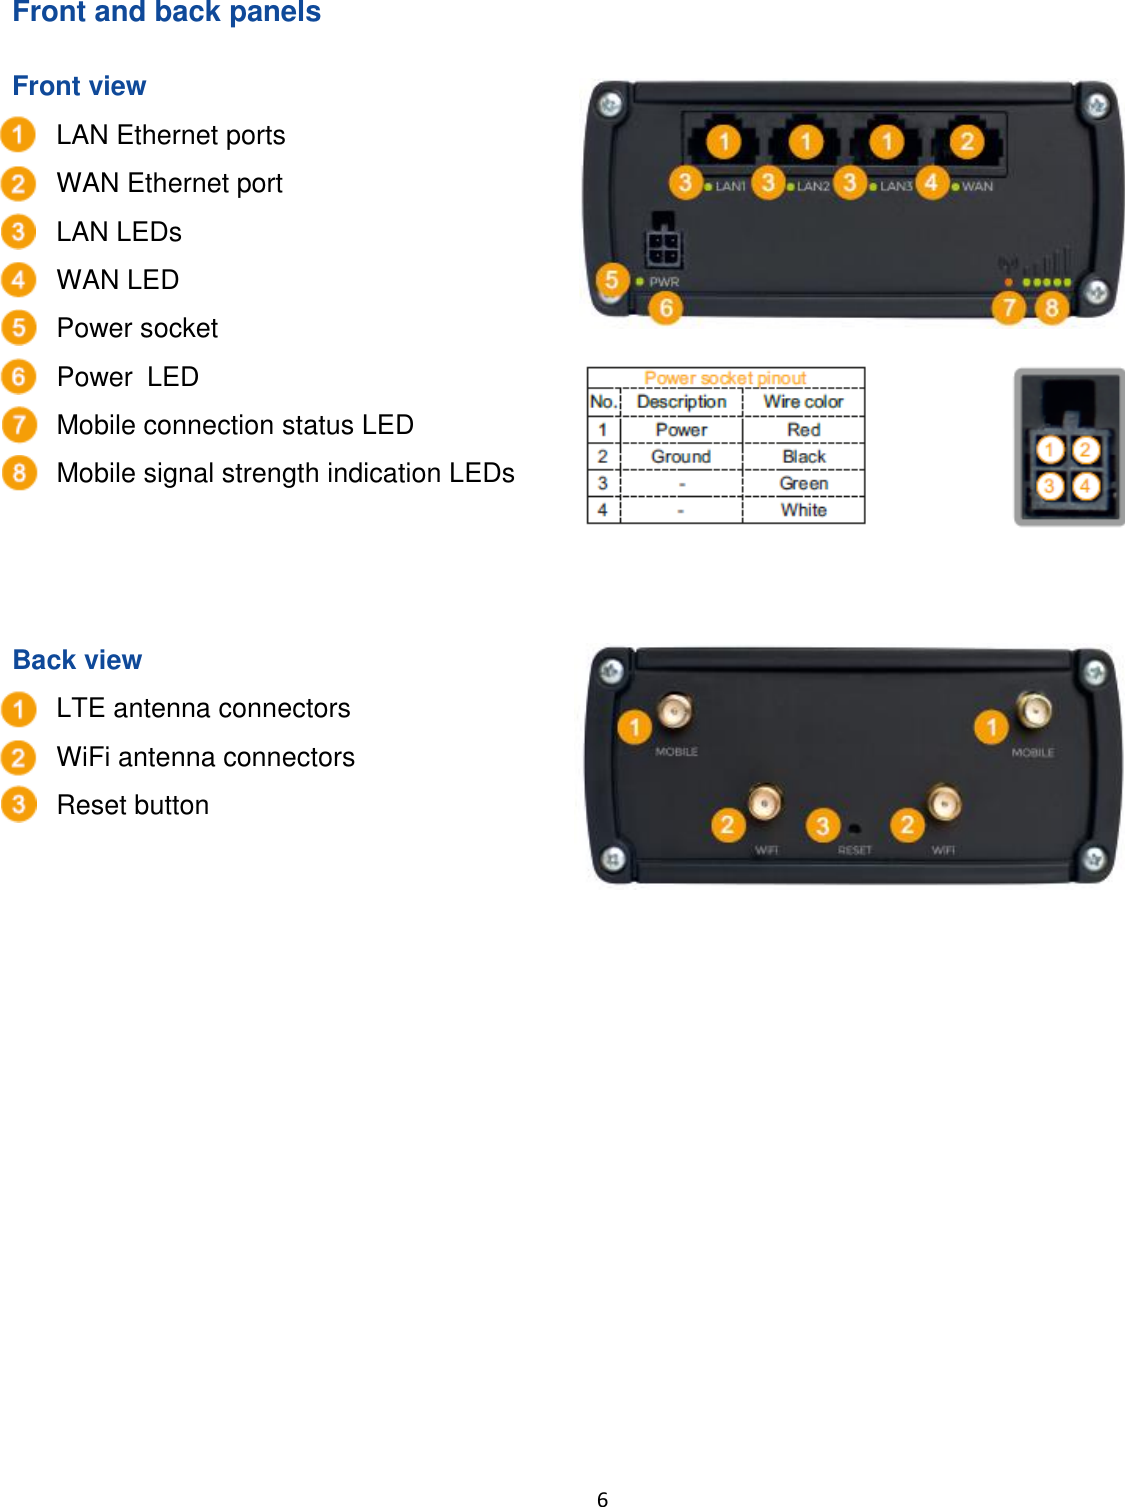  6  Front and back panels Front view  1. LAN Ethernet ports 2. WAN Ethernet port 3. LAN LEDs  4. WAN LED  5. Power socket 6. Power  LED  7. Mobile connection status LED  8. Mobile signal strength indication LEDs   Back view 1. LTE antenna connectors 2. WiFi antenna connectors 3. Reset button      